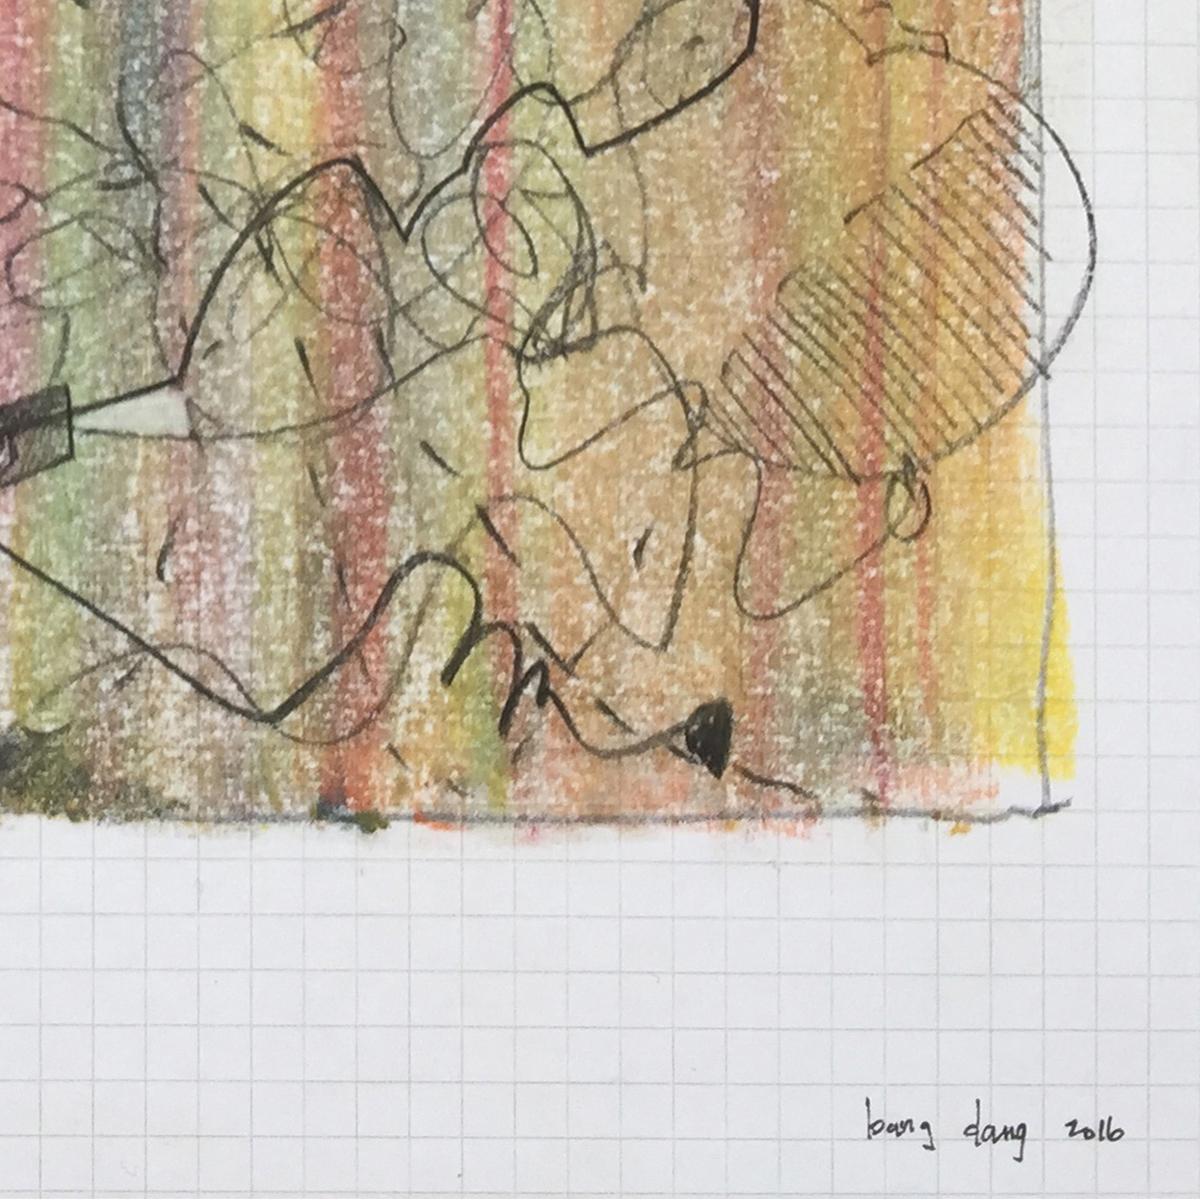 Study 08 by Bang Dang on graph paper. Abstract with crayon, pastel & fine lines  4